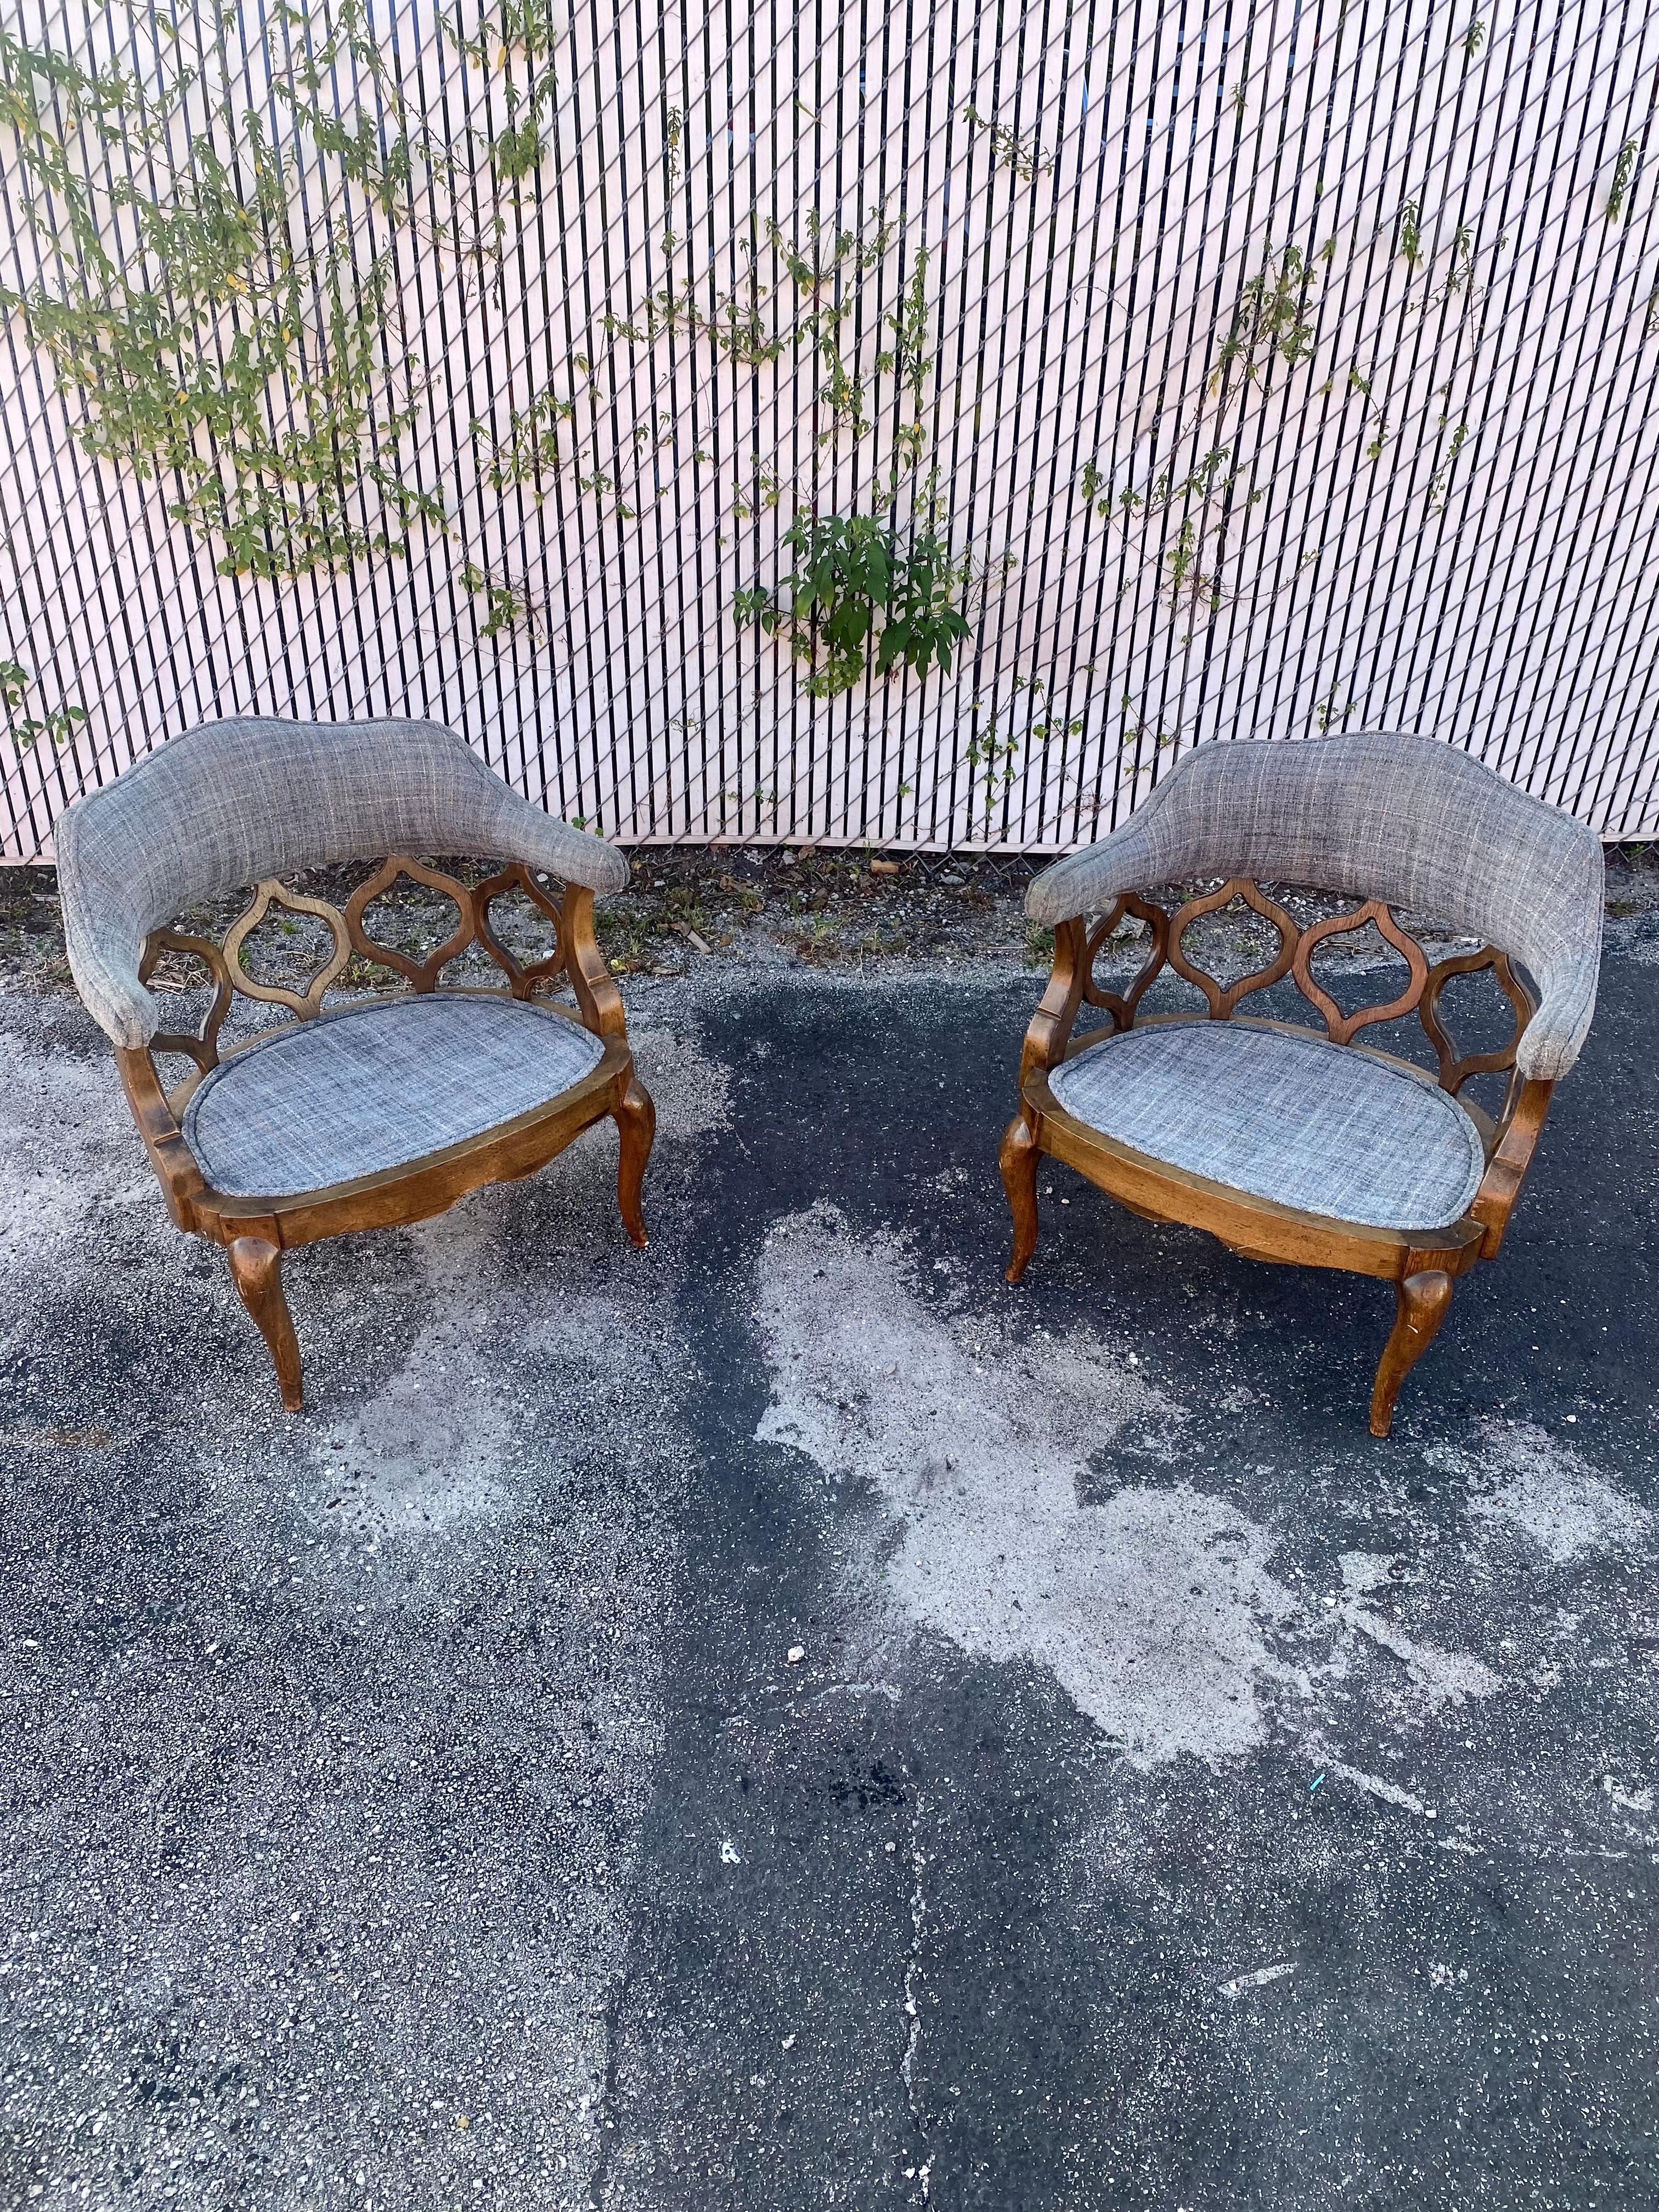 1970s  Mid Century Sculptural Curved Barrel Tweed Wood Chairs, Set of 2 For Sale 8